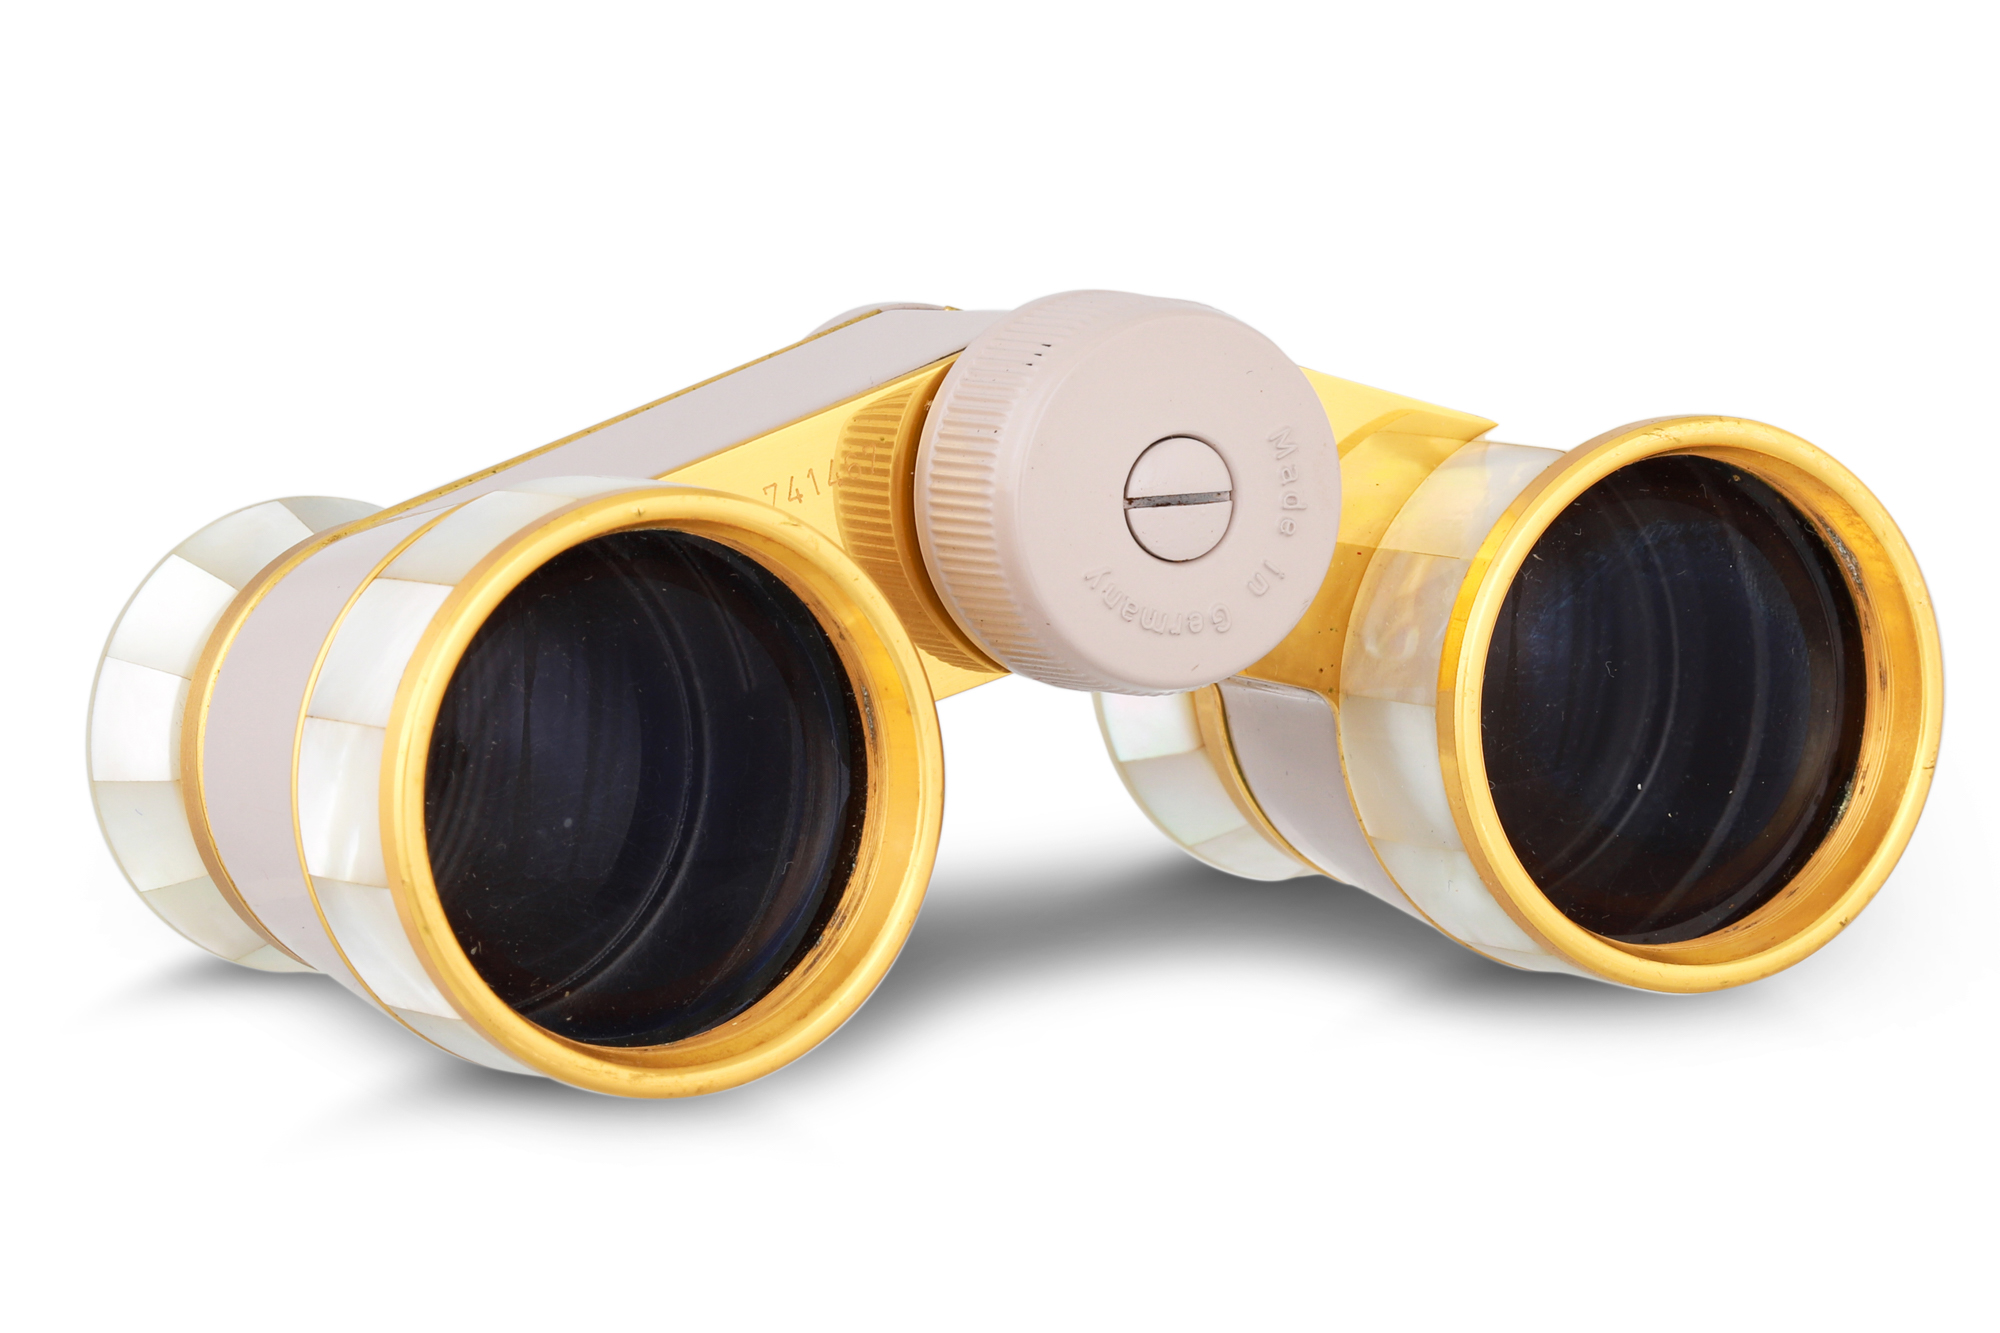 A PAIR OF CARL ZEISS OPERA GLASSES, cased